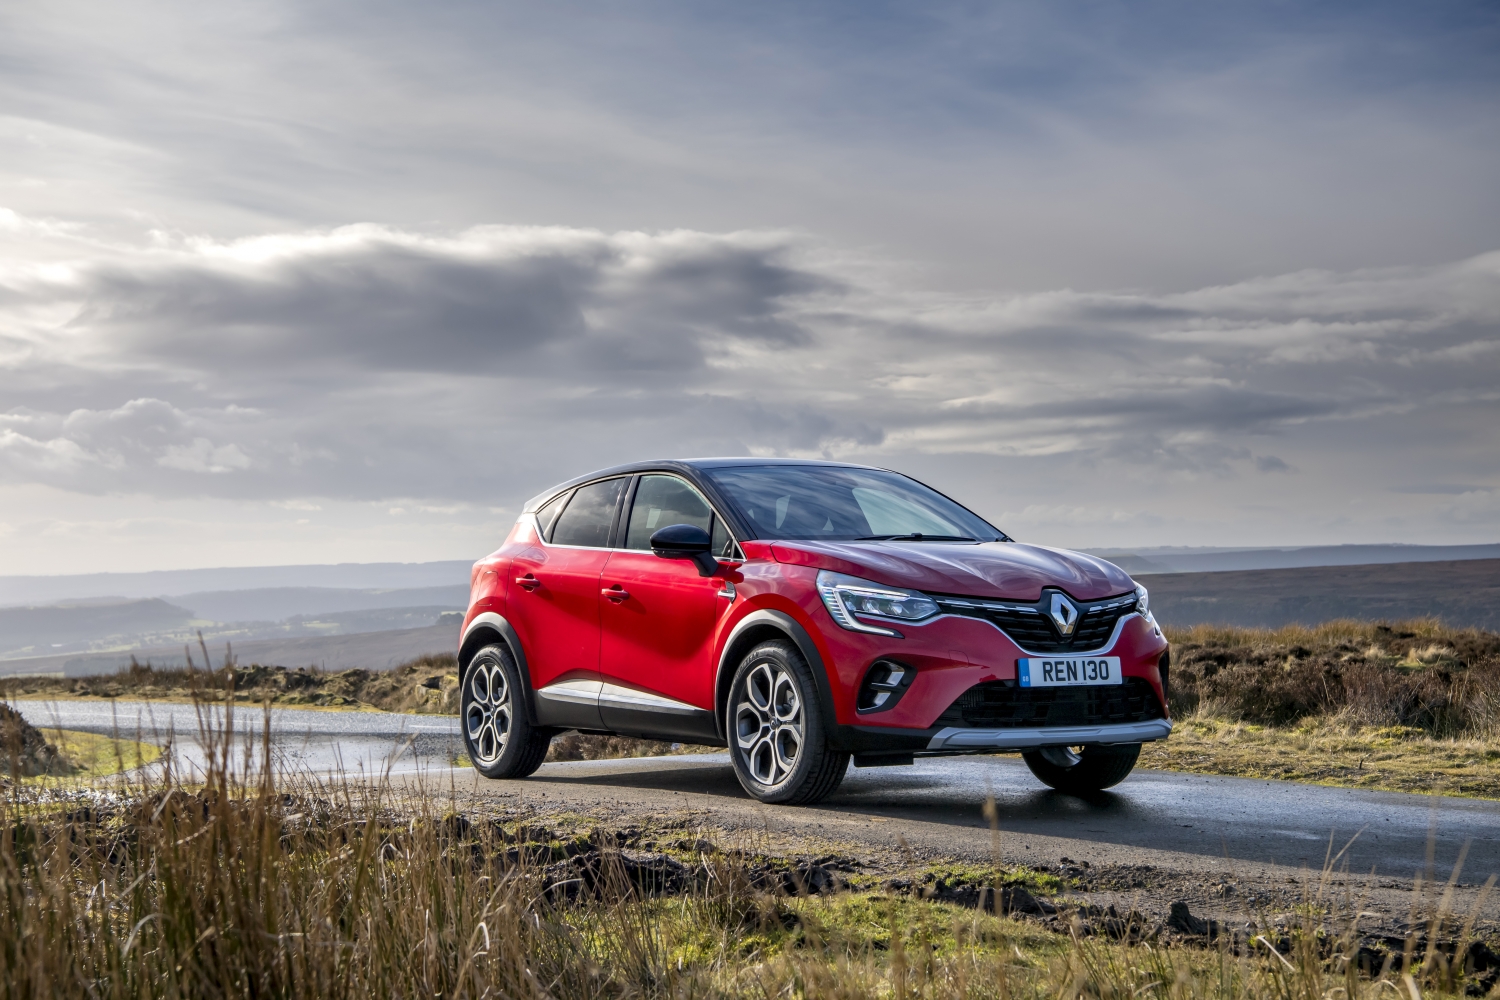 Nissan could move production of two Renault SUV models to Sunderland plant